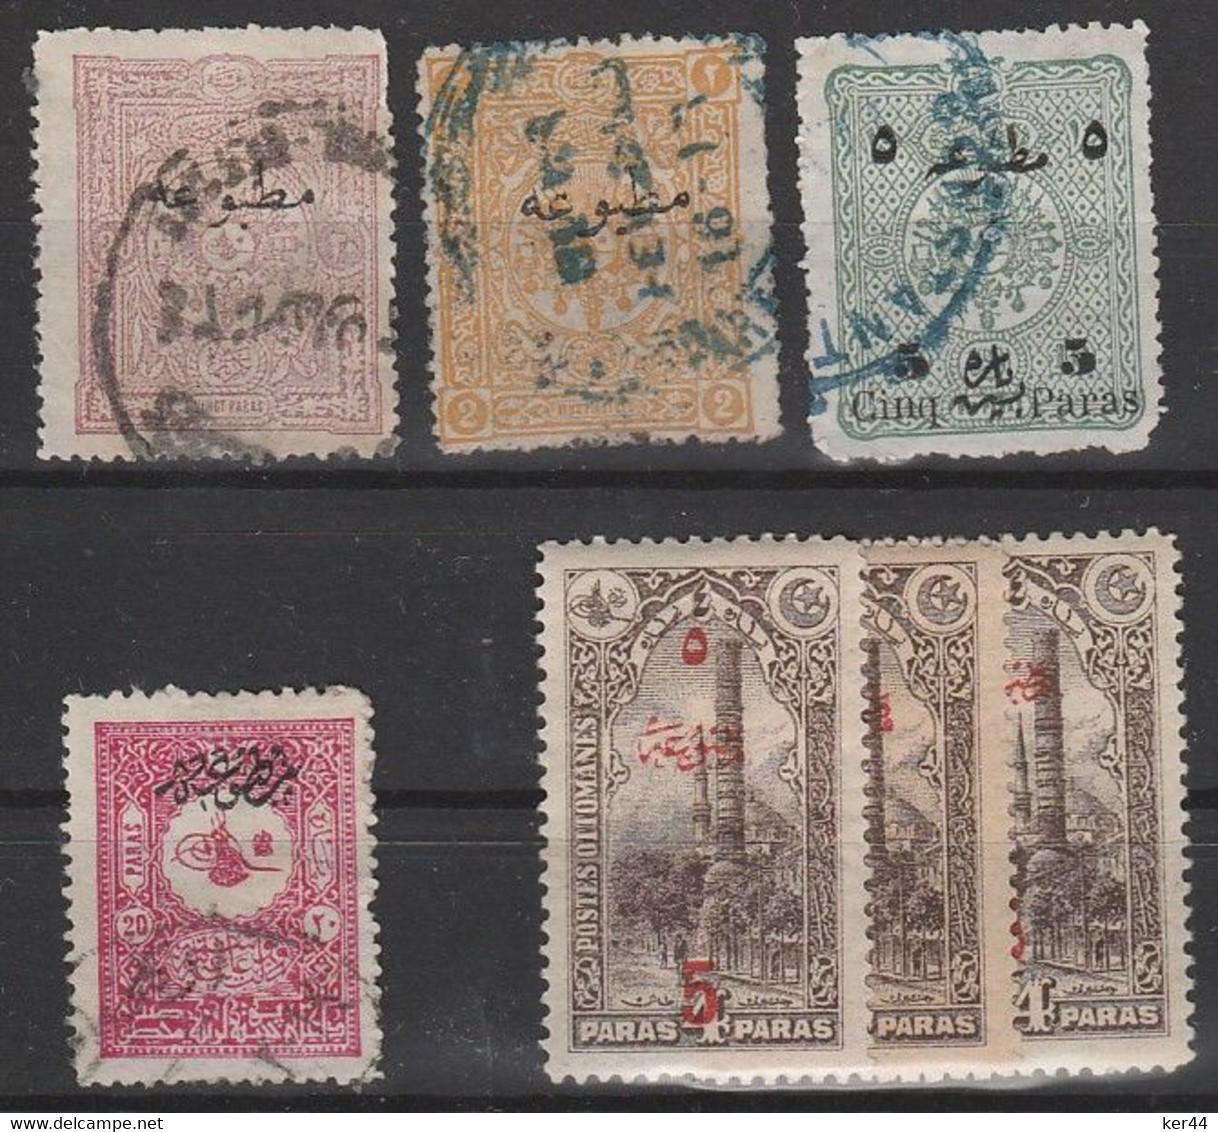 Journaux_Lot De 7 Timbres **/*/O -  Newspaper Stamps Lot_MNH/MH/USED - Zeitungsmarken